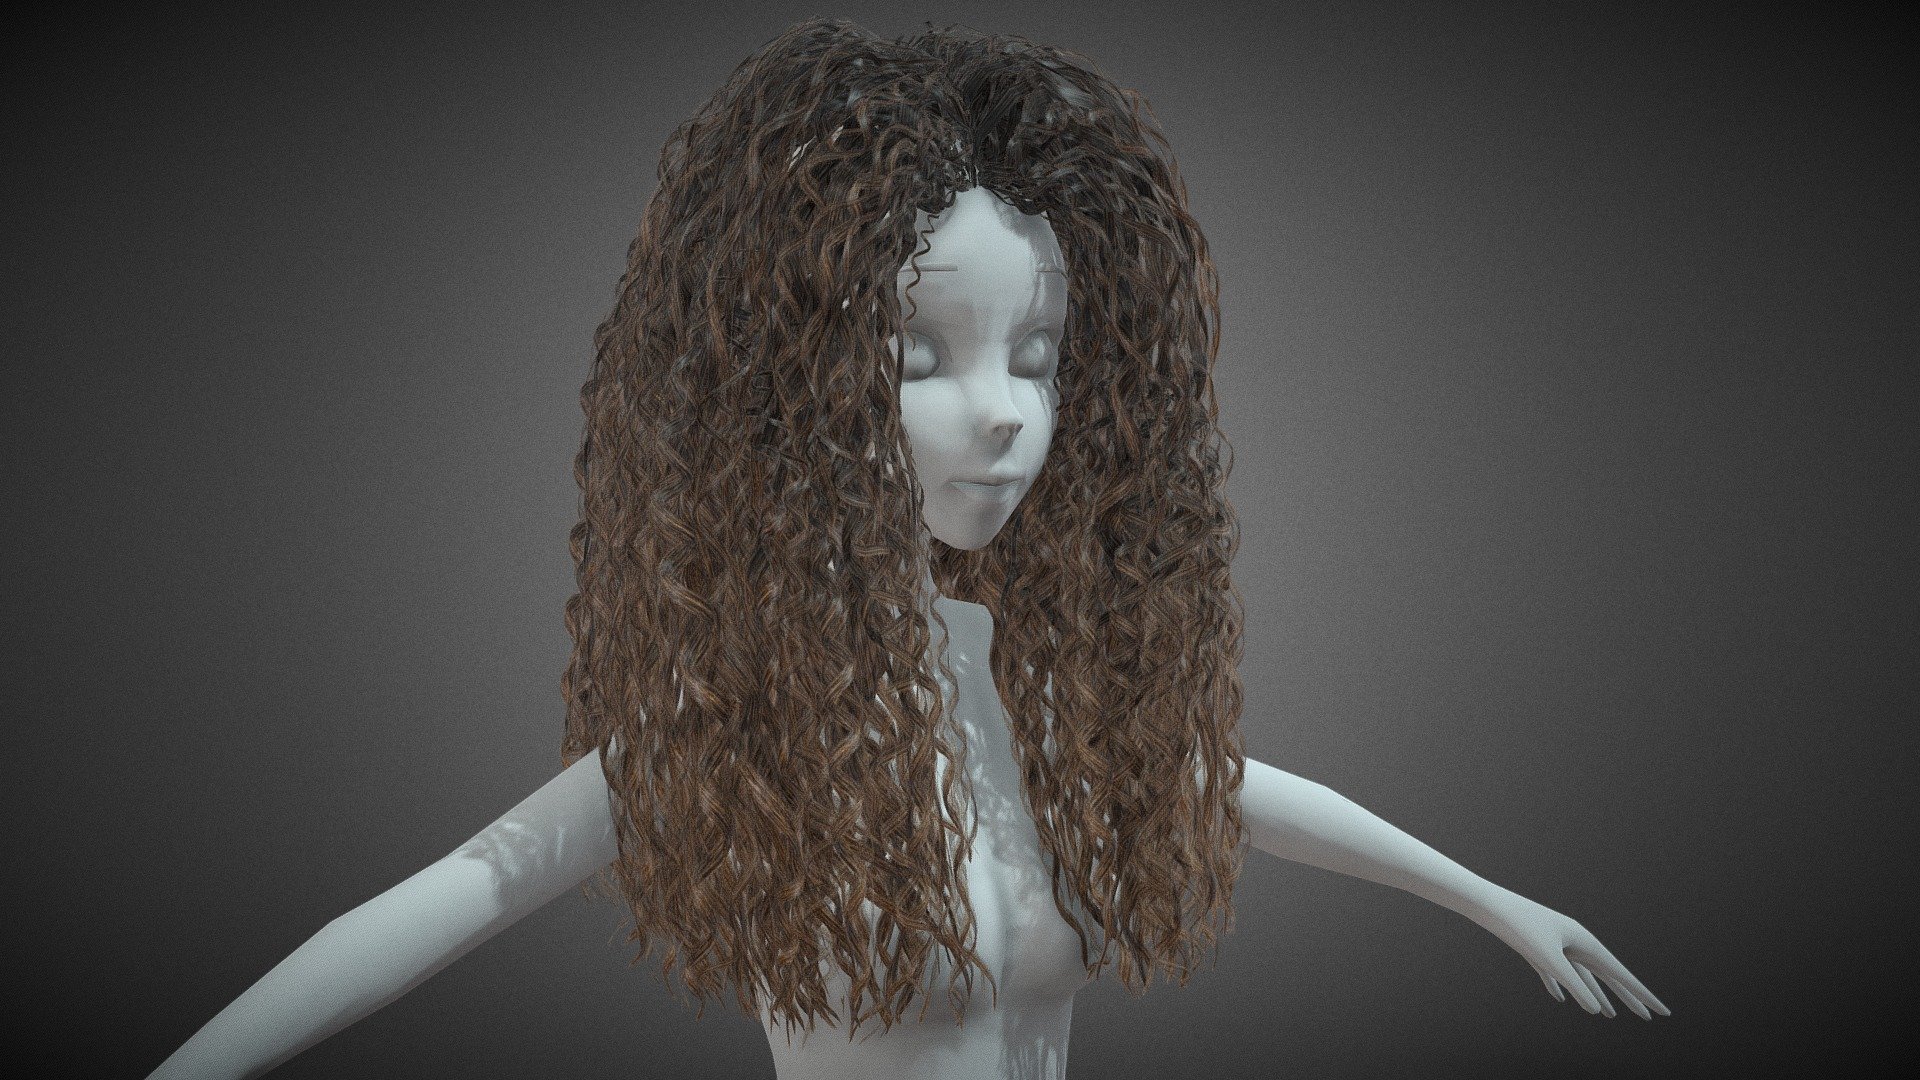 CG StudioX Present :
Female Hair Cards Style 10 - Long Curly  lowpoly/PBR




The photo been rendered using Marmoset Toolbag 4 (real time game engine )

The head model is decimated to show how the hair looks on the head.


Features :



Comes with Specular and Metalness PBR 4K texture .

Good topology.

Low polygon geometry.

The Model is prefect for game for both Specular workflow as in Unity and Metalness as in Unreal engine .

The model also rendered using Marmoset Toolbag 4 with both Specular and Metalness PBR and also included in the product with the full texture.

The texture can be easily adjustable .


Texture :



One set of UV for the Hair [Albedo -Normal-Metalness -Roughness-Gloss-Specular-Ao-Alpha-Depth-Direction-ID-Root] (4096*4096).

One set of UV for the Cap [Albedo -Normal-Metalness -Roughness-Gloss-Specular-Alpha] (4096*4096).


Files :
Marmoset Toolbag 4 ,Maya,,FBX,glTF,Blender,OBj with all the textures.




Contact me for if you have any questions.
 - Female Hair Cards Style 10 - Long Curly - Buy Royalty Free 3D model by CG StudioX (@CG_StudioX) 3d model